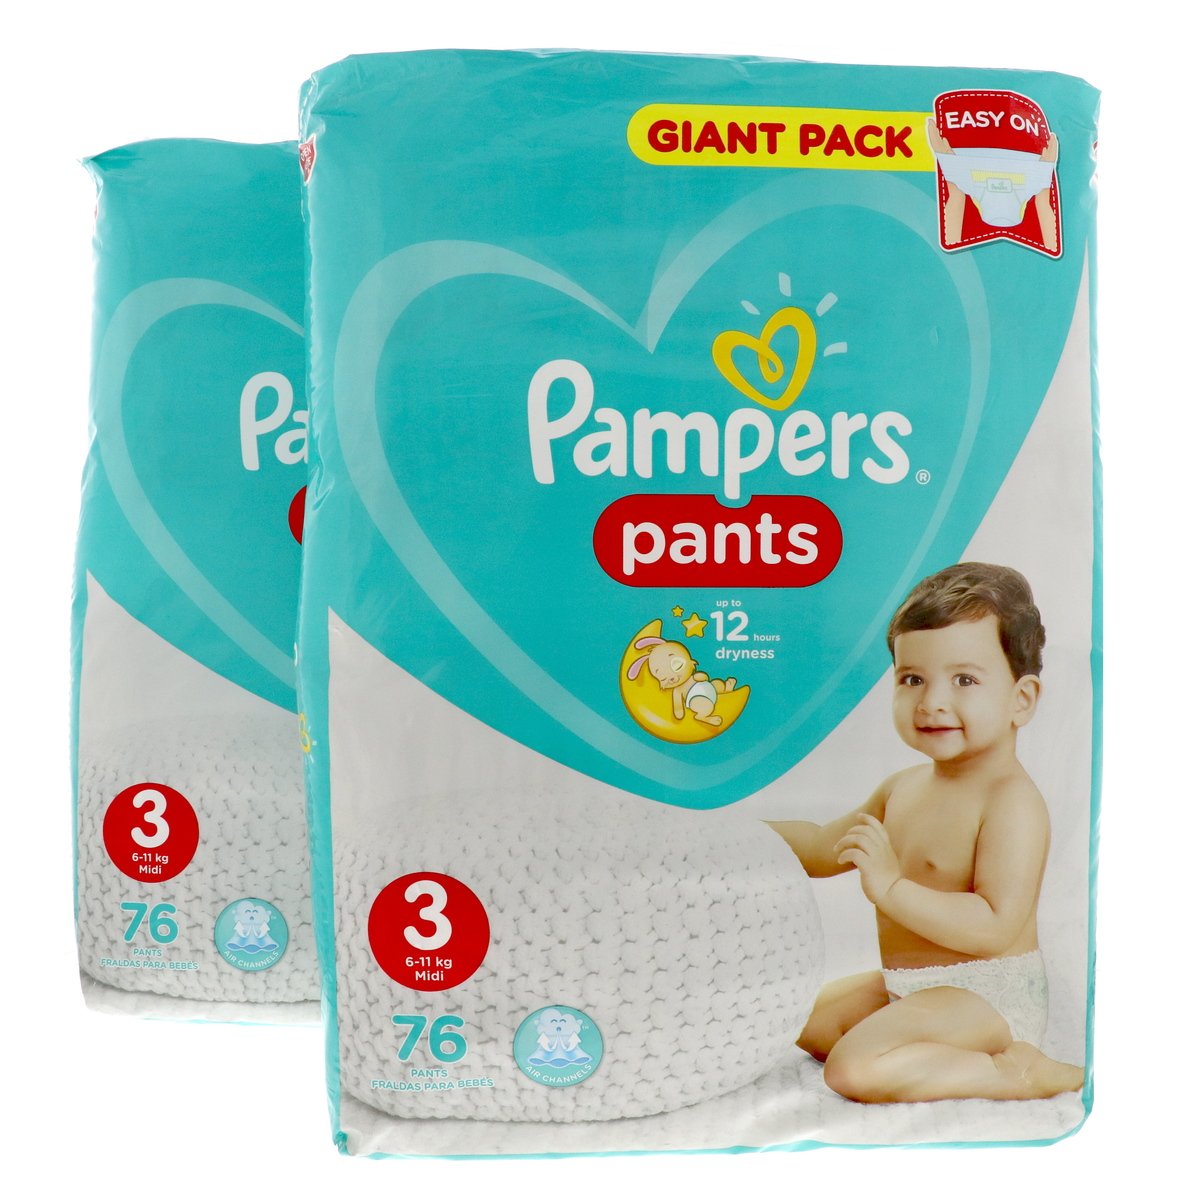 Pampers Baby Dry Pants Diapers, Size 3, 6 - 11 Kg, 76 Count Giant Pack,  Touch of Aloe Vera Lotion price in Dubai, UAE